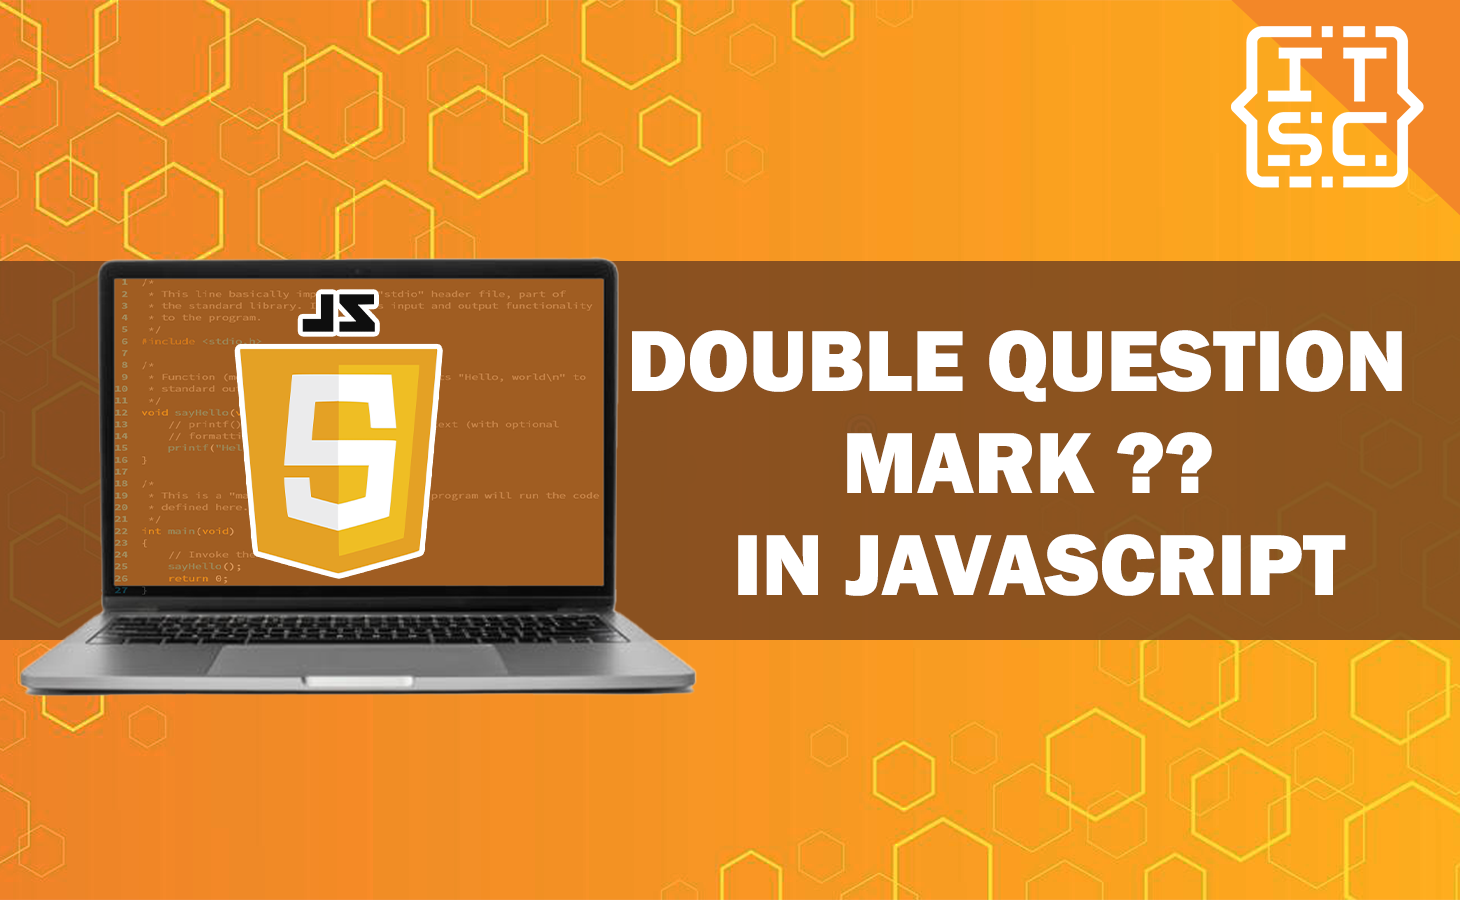 Double question mark in JavaScript